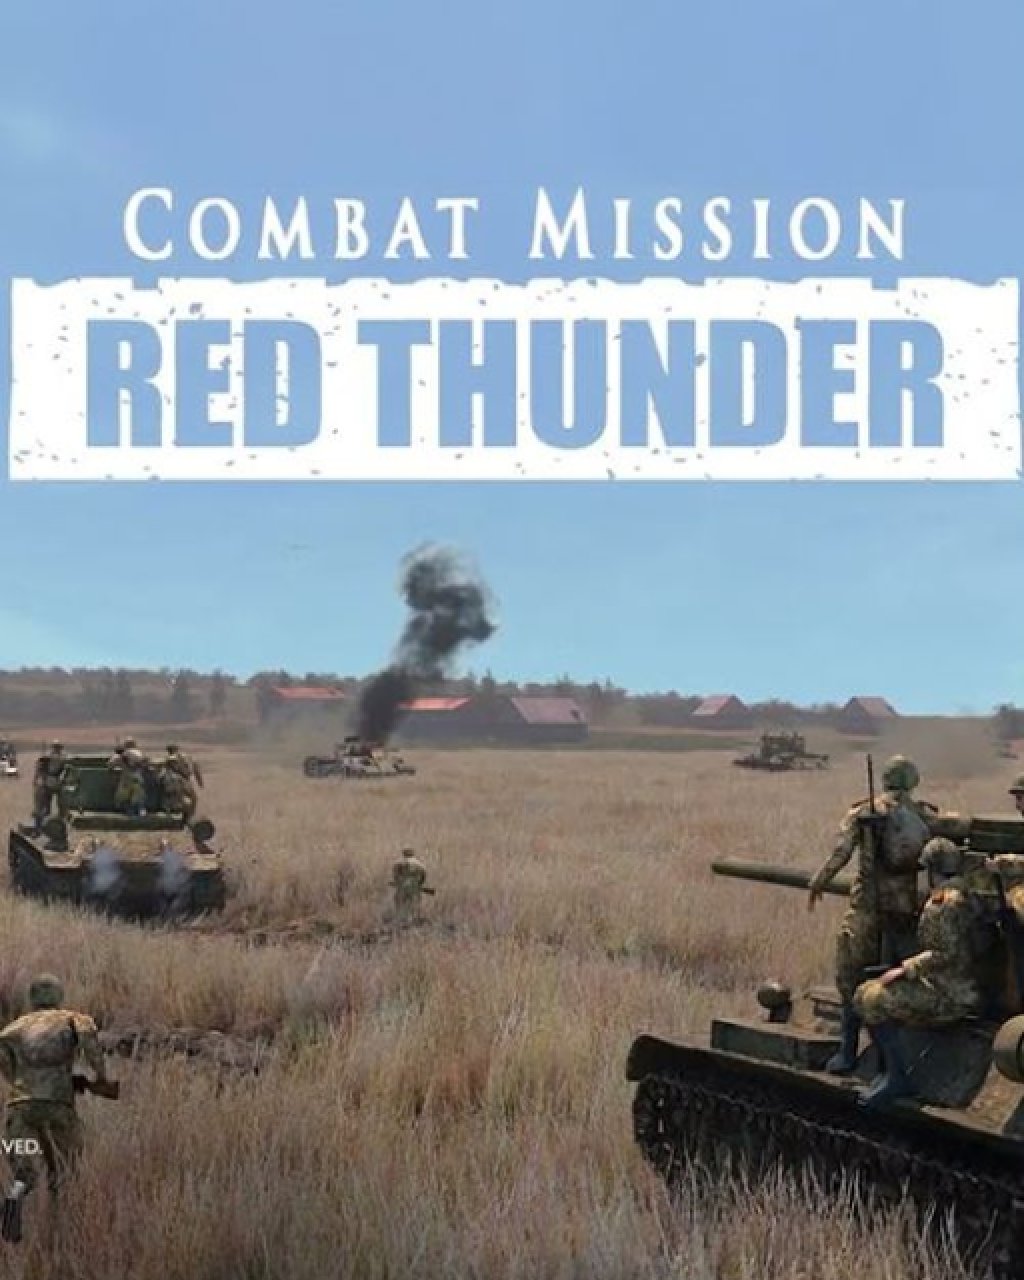 Combat Mission Red Thunder